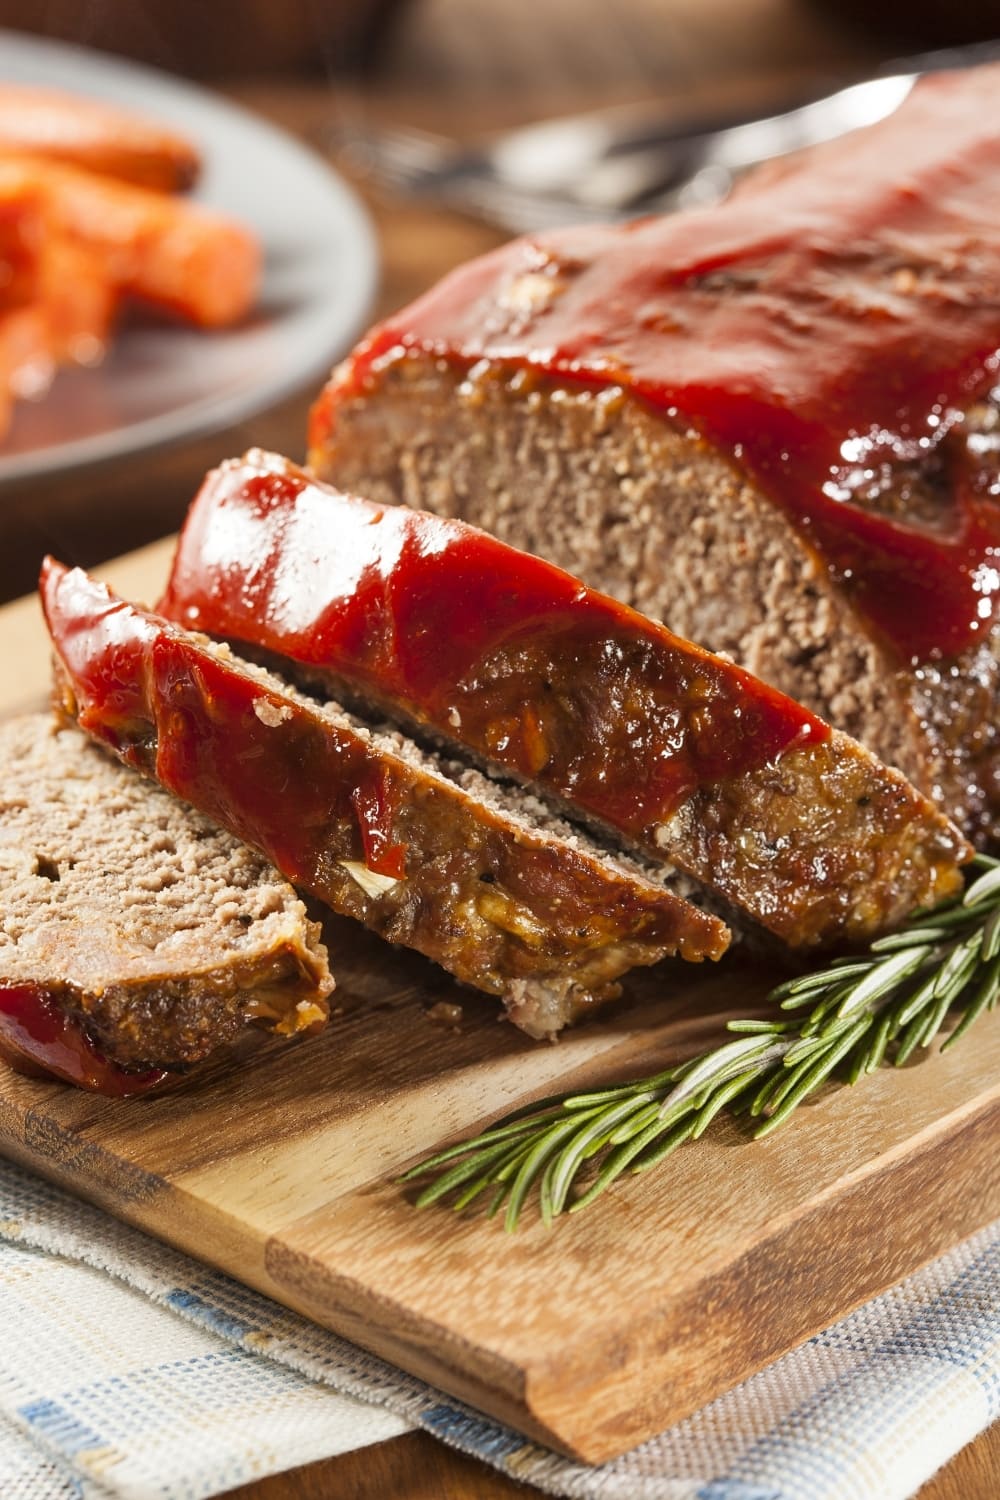 Ground Beef Meatloaf with Ketchup in a Wooden Board